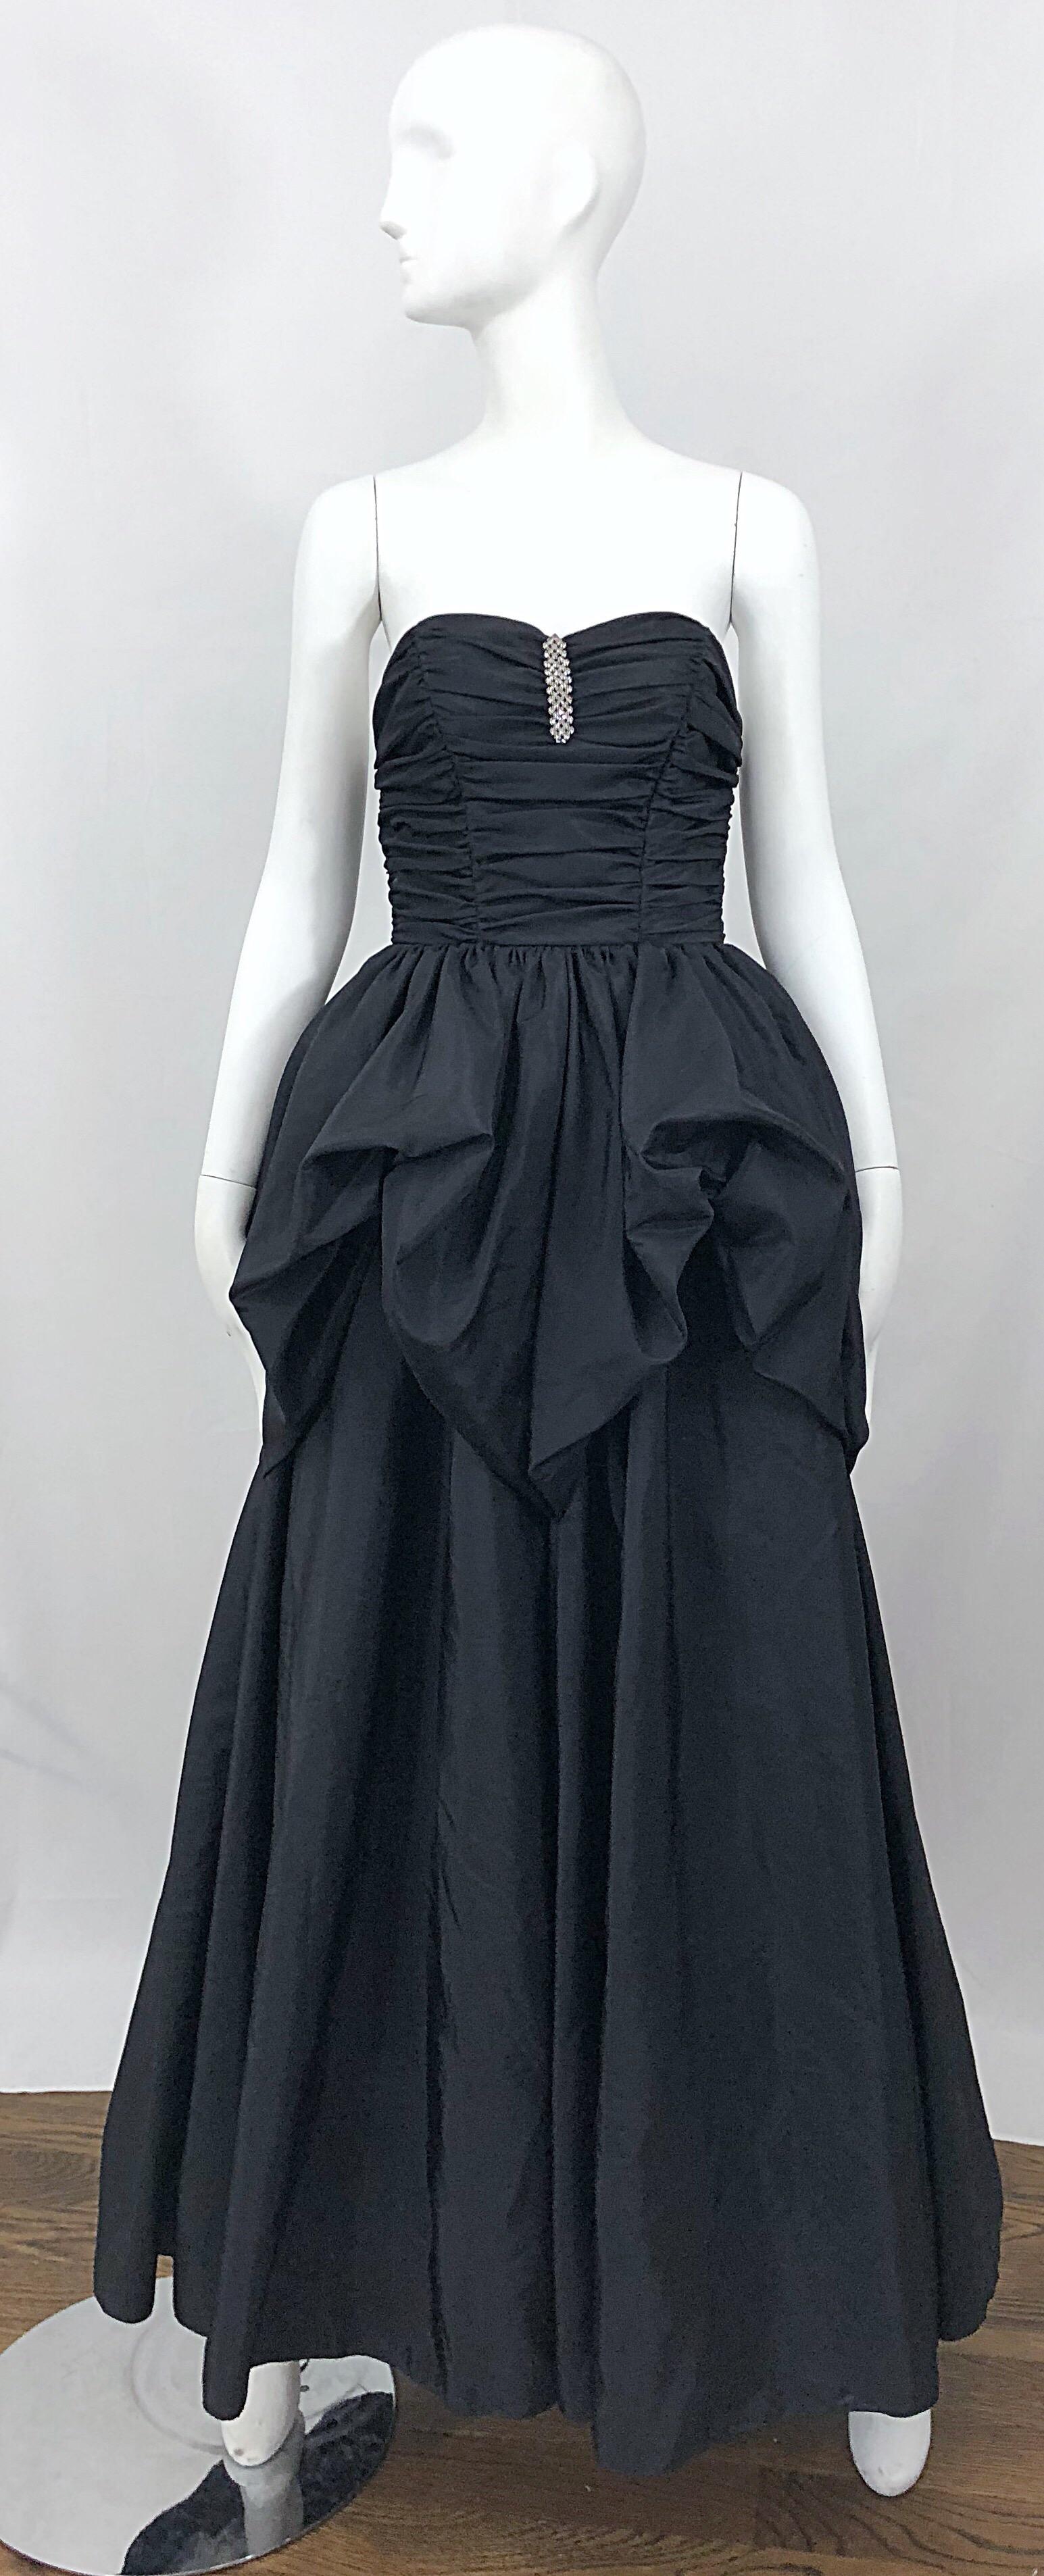 Fabulous vintage 80s MIKE BENET black taffeta strapless bustle gown! Features a ruched boned bodice with sparkly rhinestones at center. Bustle style pouf skirt leads to an elegant long skirt. Hidden zipper up the back with hook-and-eye closure. Has